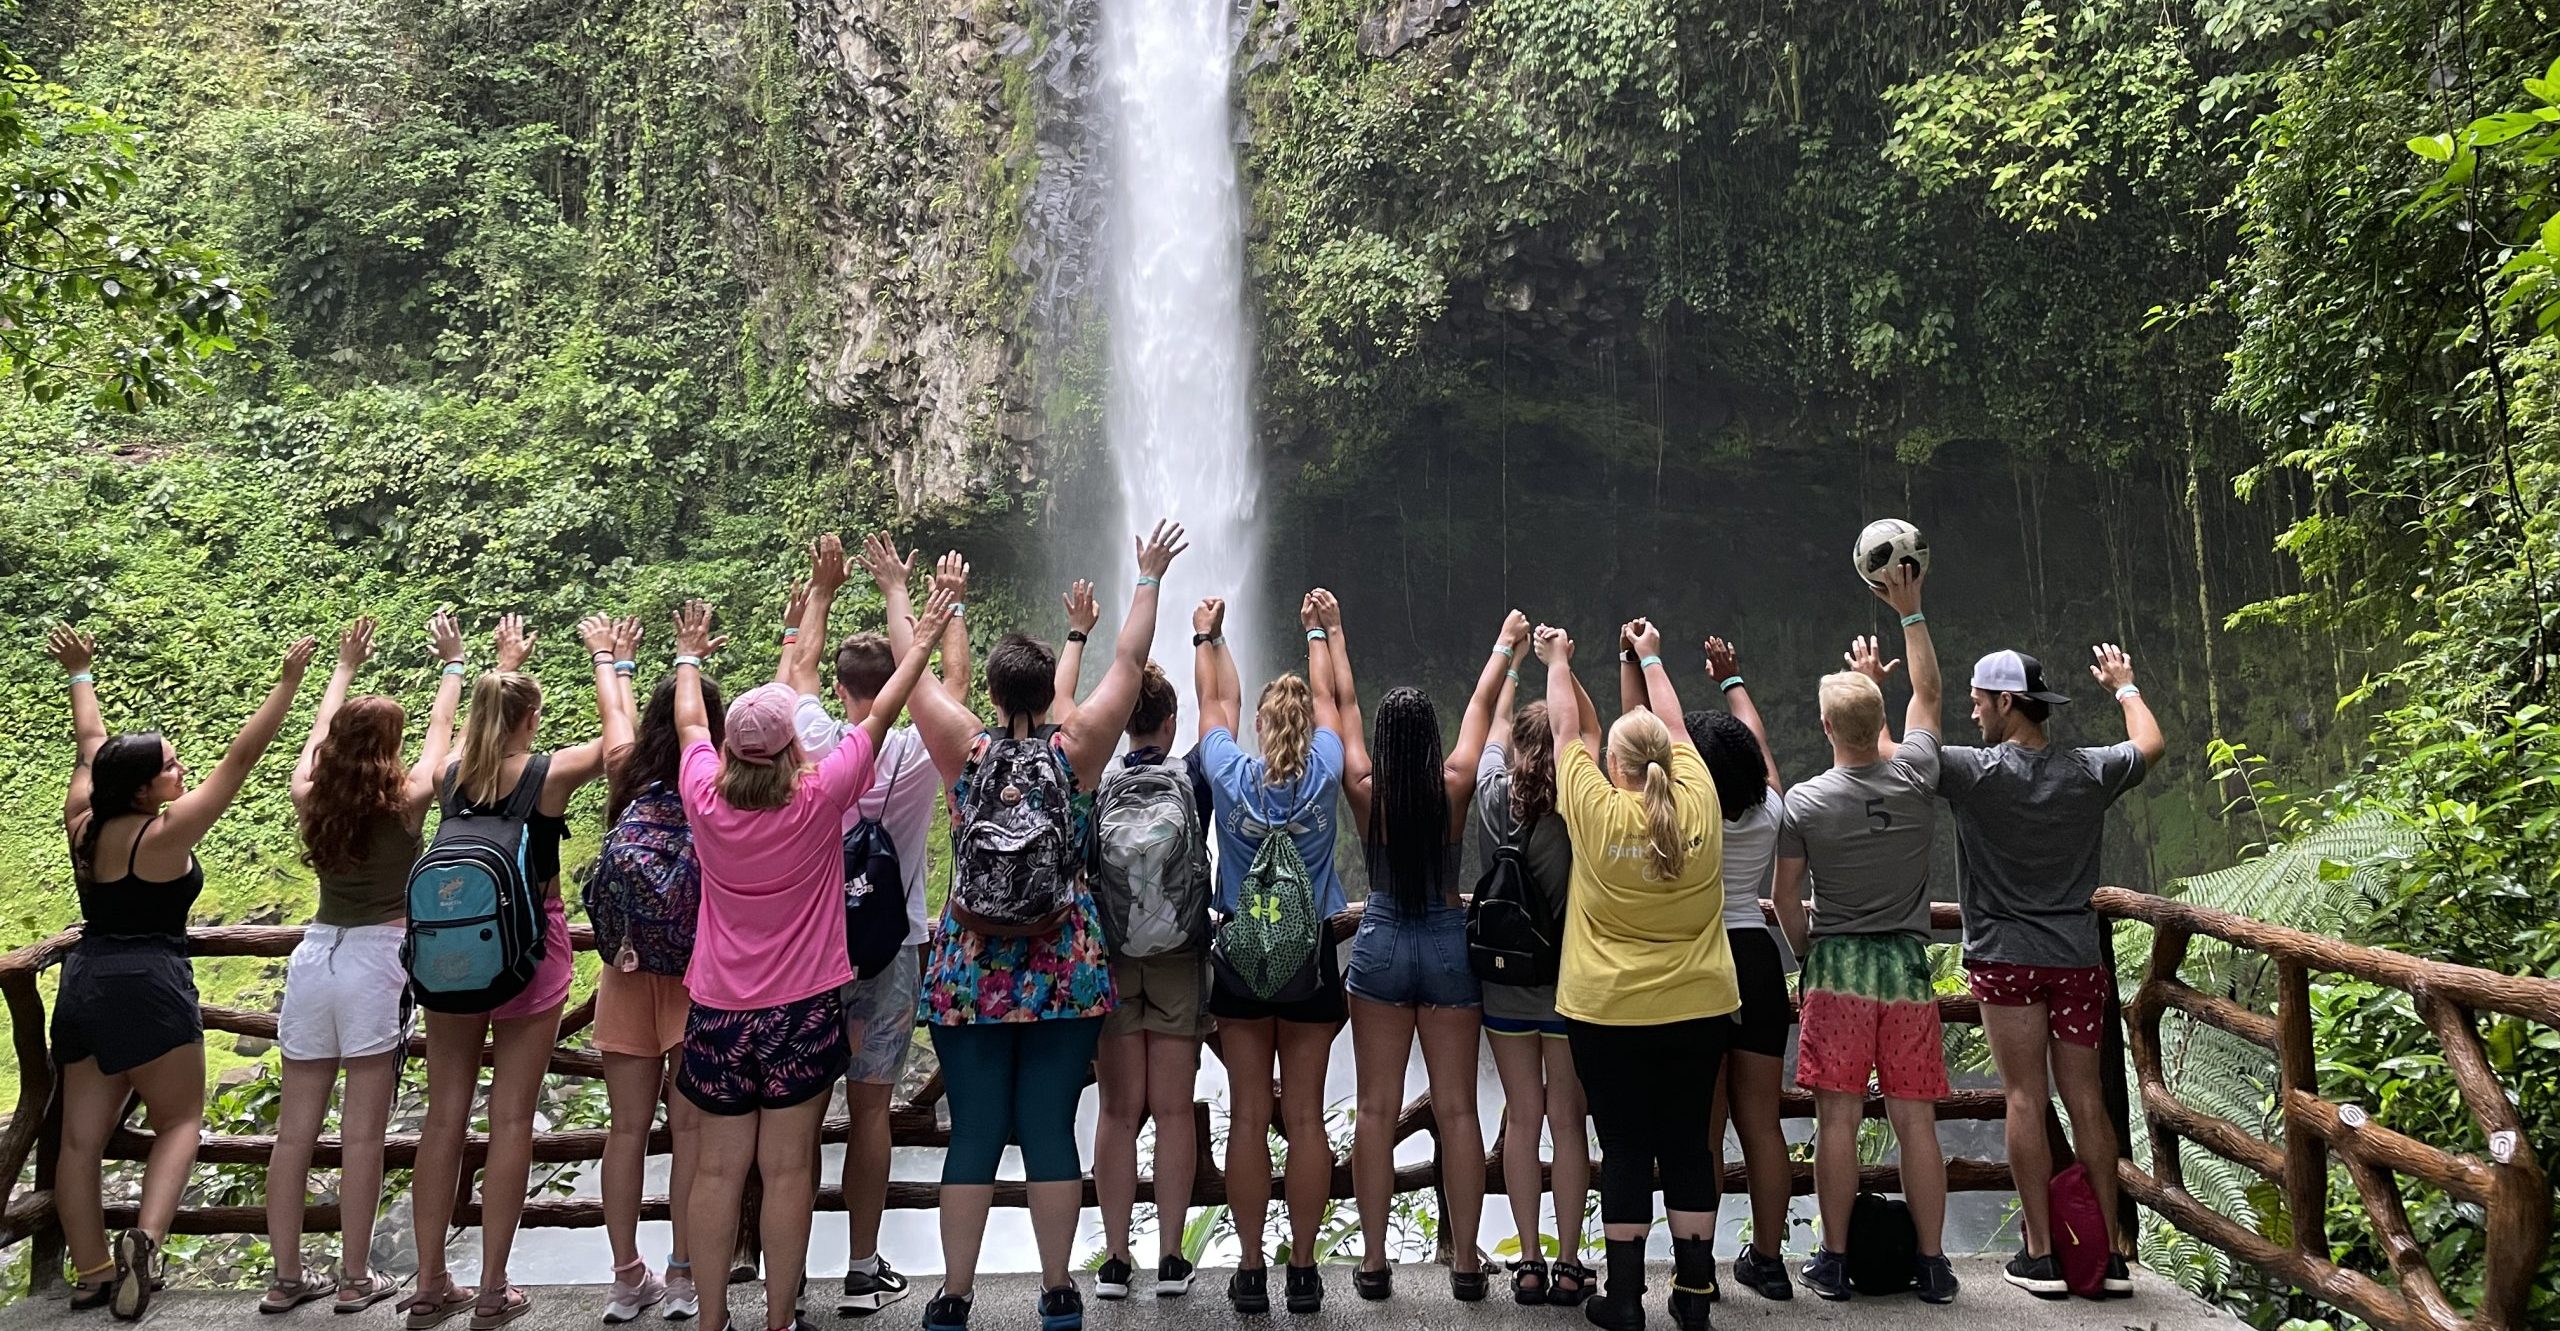 LVC student group at waterfall in Costa Rica